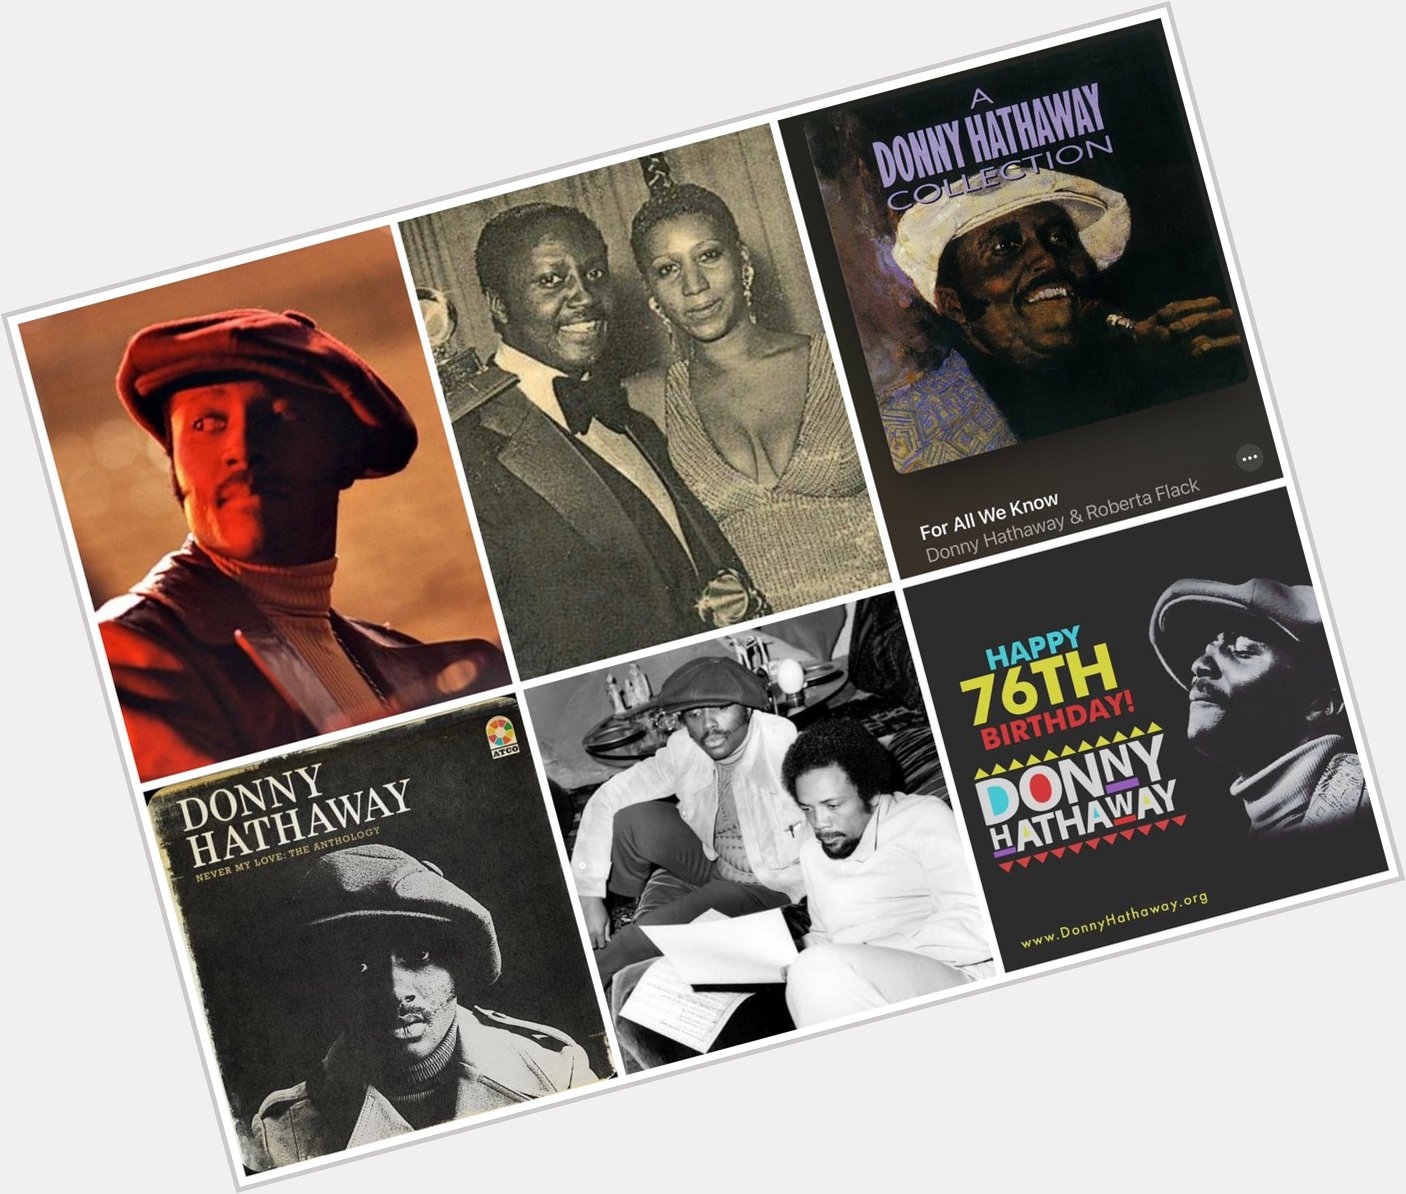 Siri play For All We Know by Donny  Hathaway Happy 76th Birthday to one of my favorite singers  